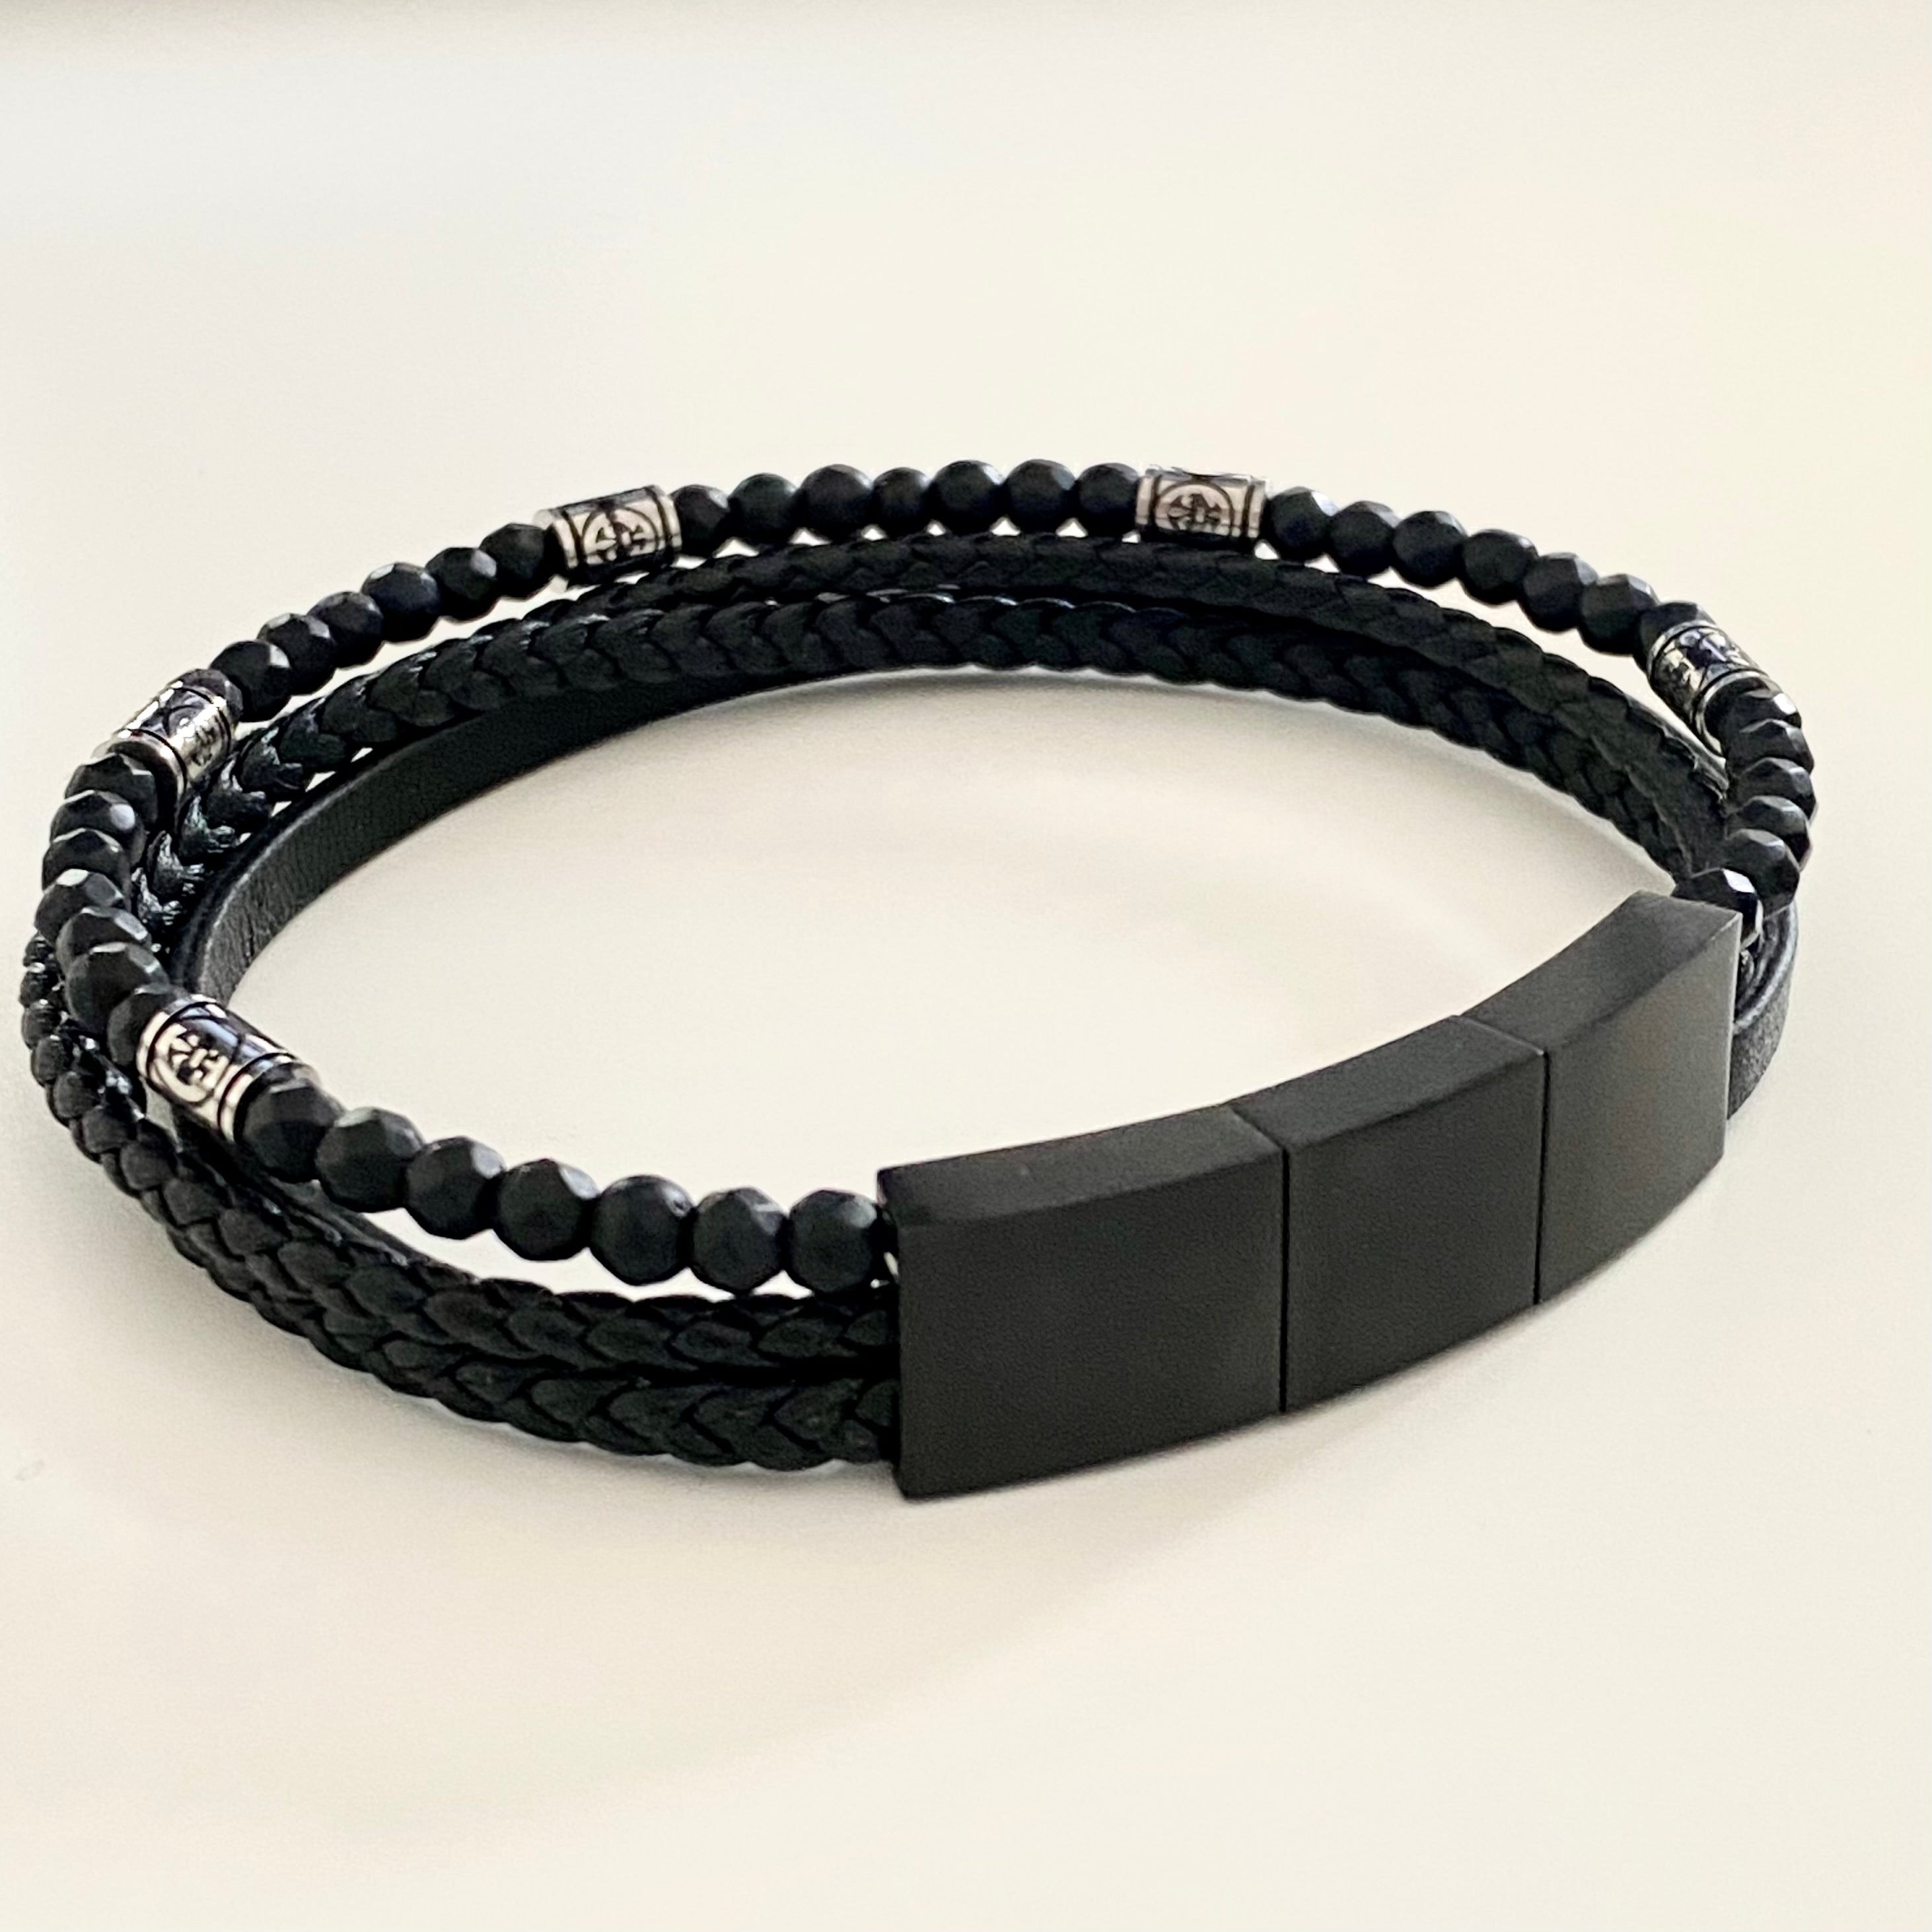 Black Nappa Leather 4 Band Bracelet with Black Onyx and Magnetic Steel Clasp